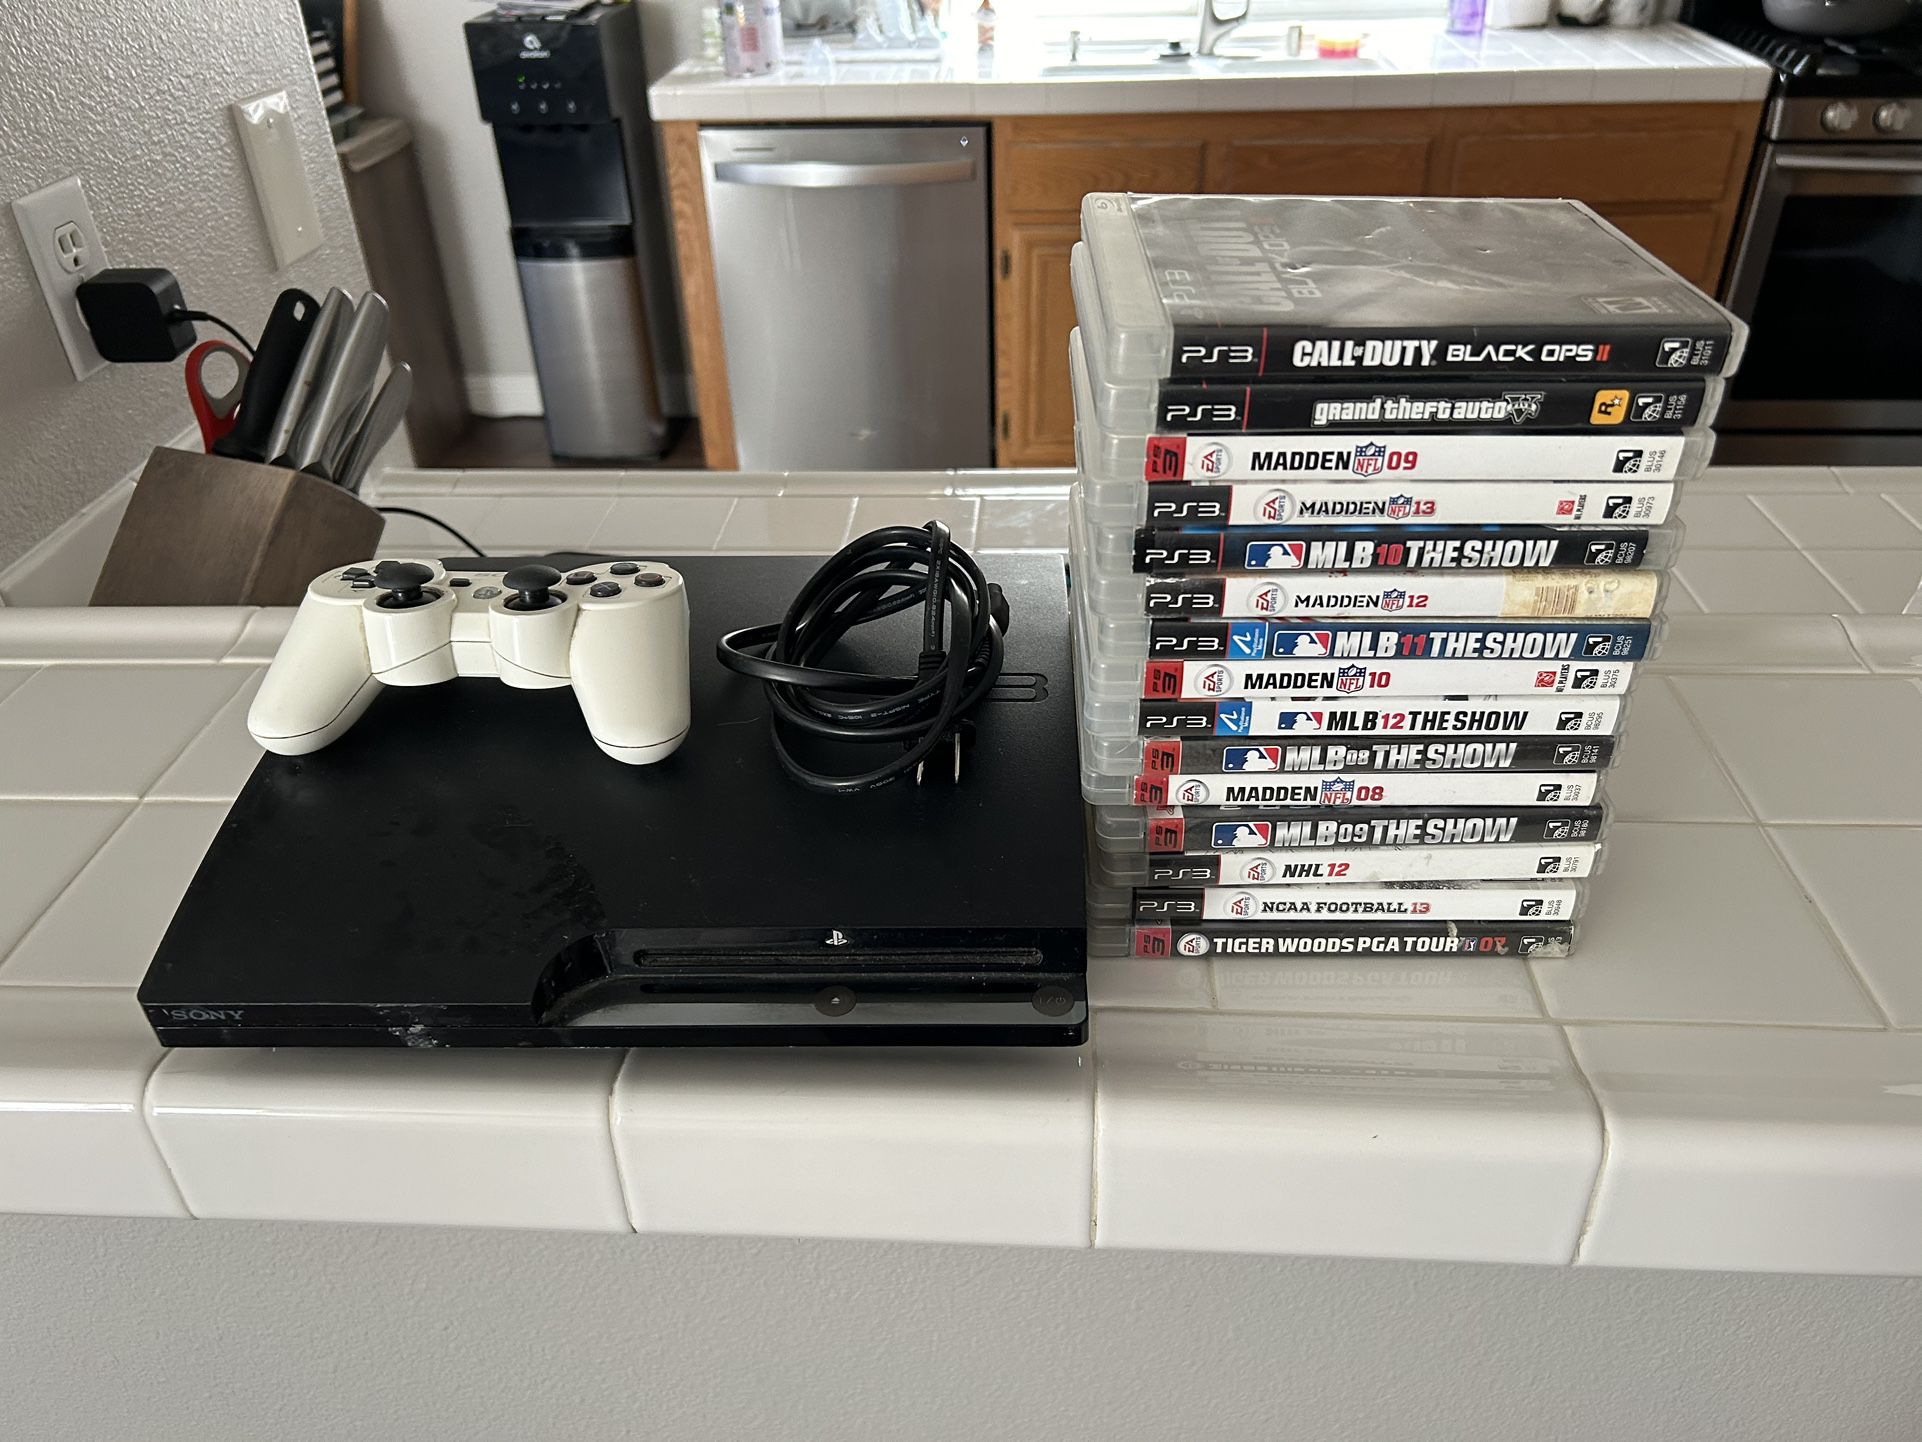 Modded Ps3 And Regular Xbox 360 Lots Of Games